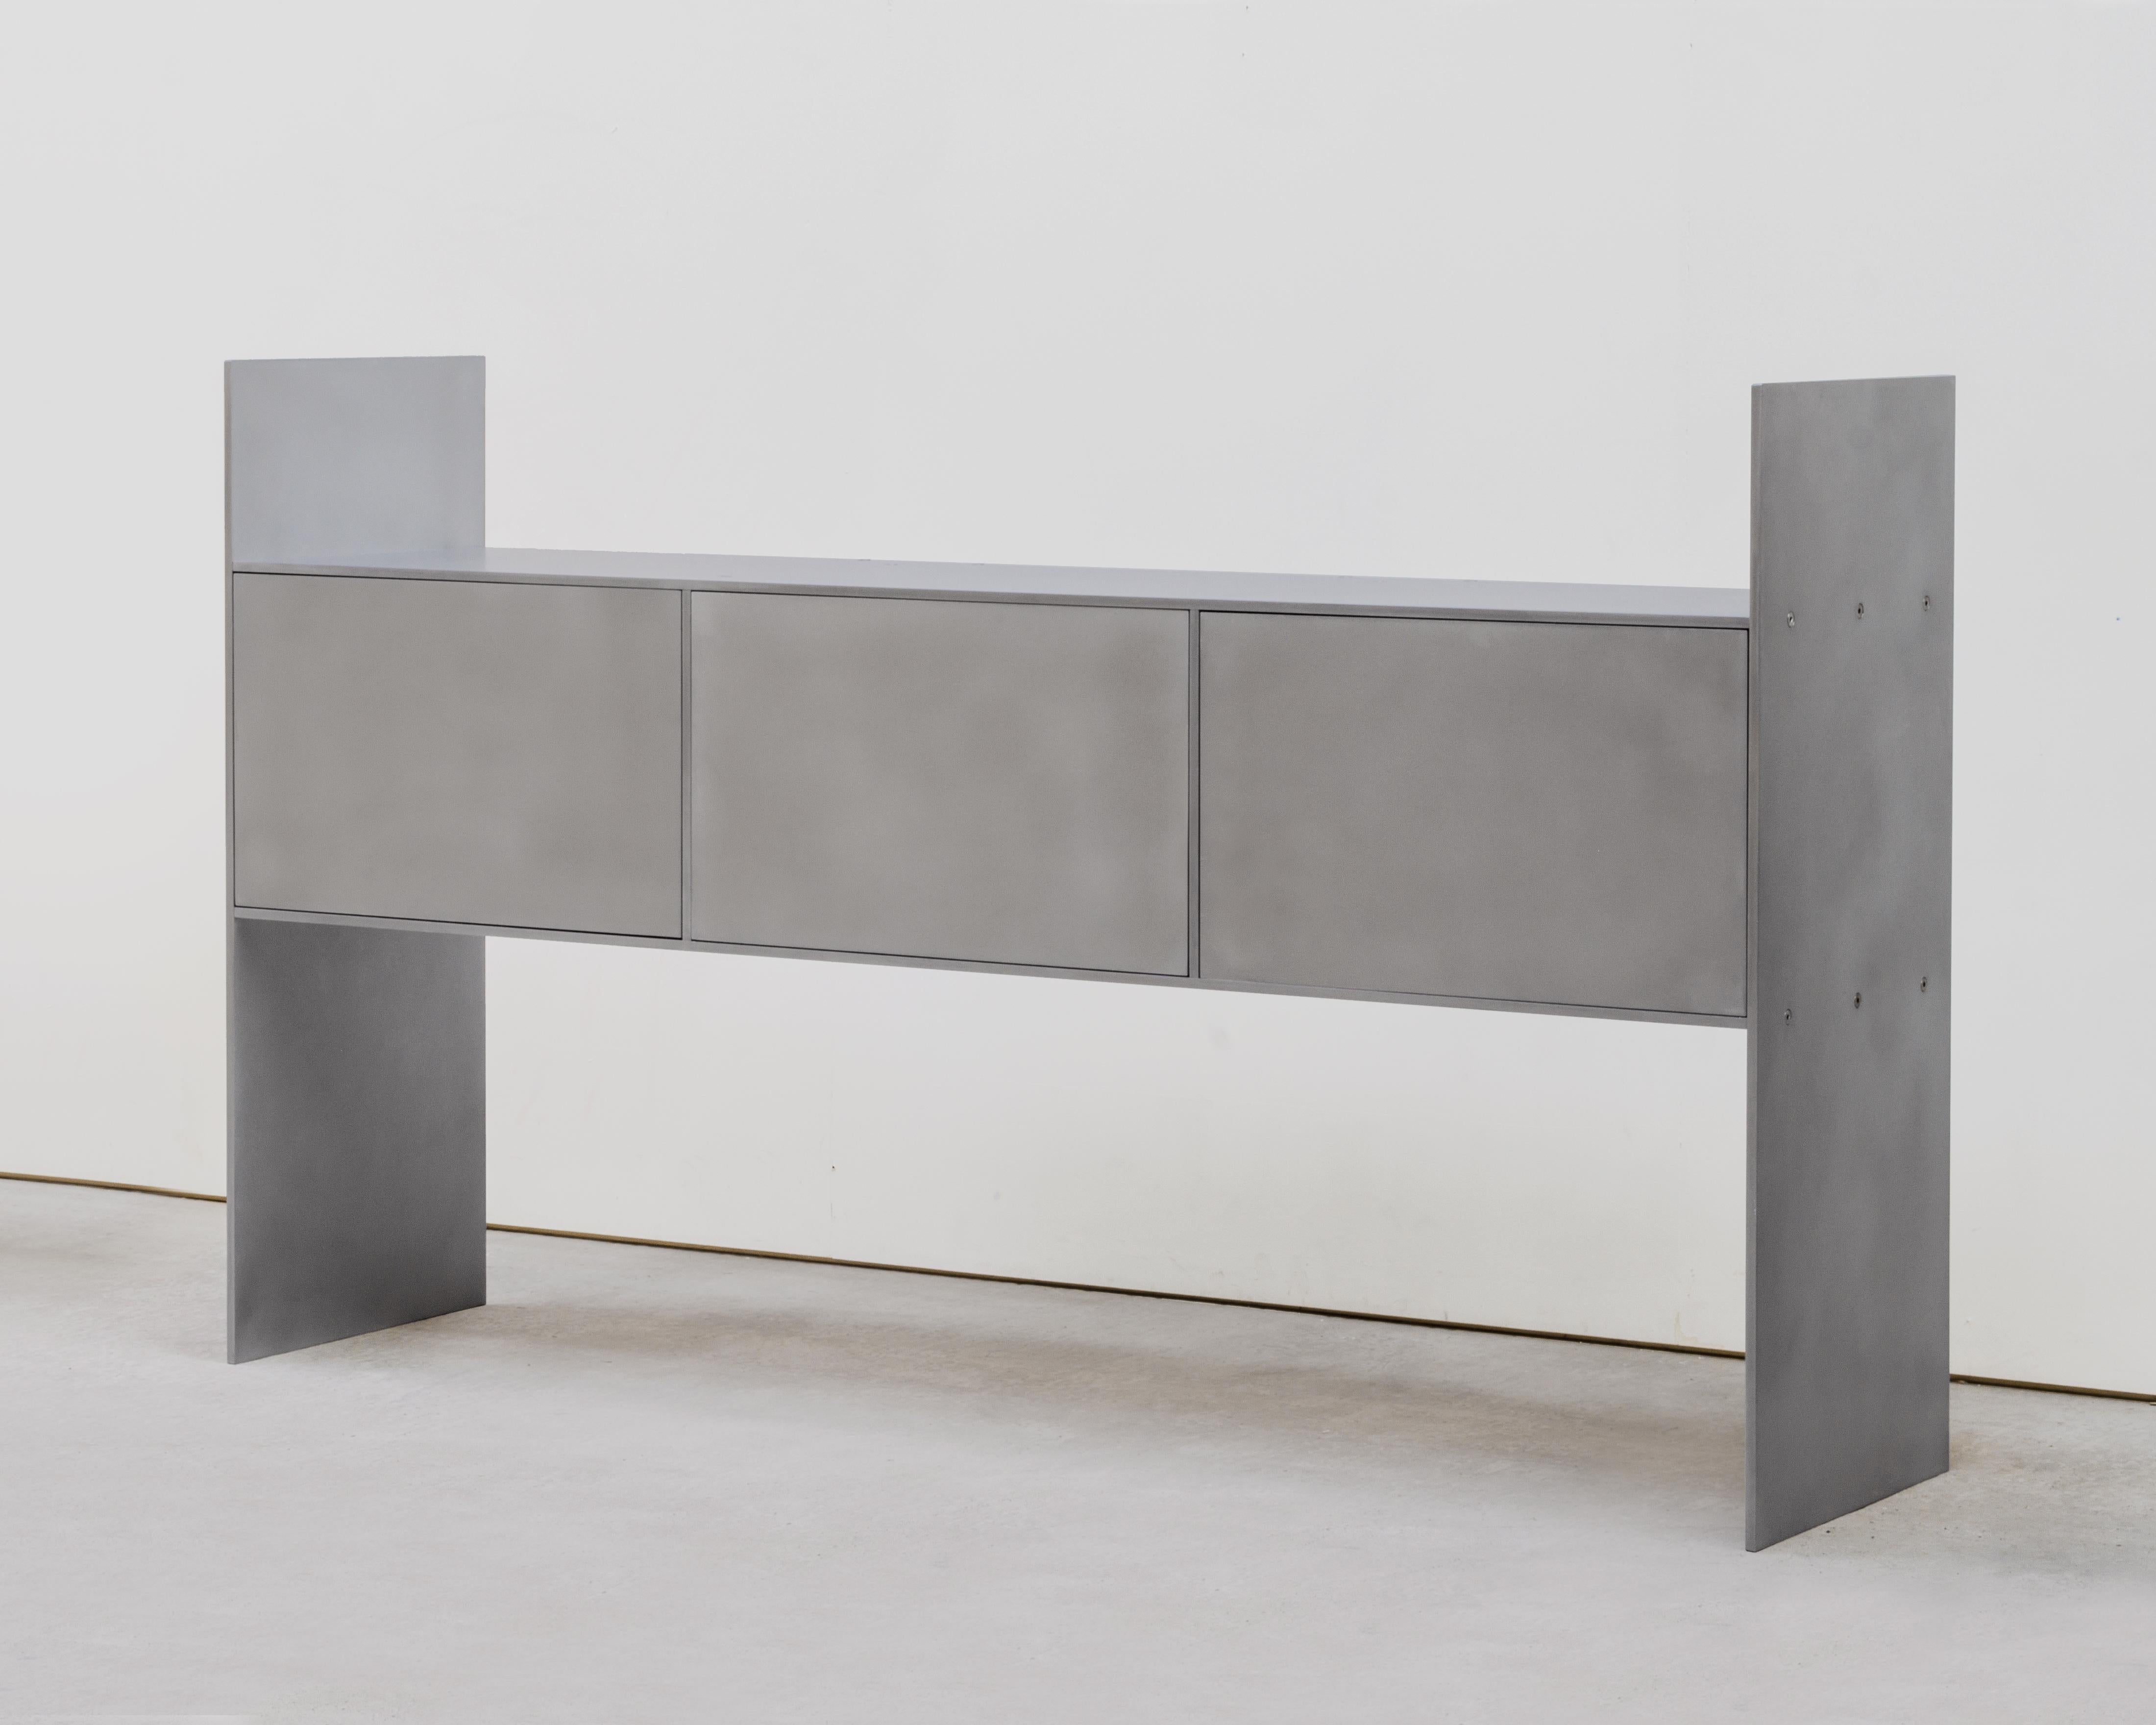 Credenza is an aluminium cabinet, designed and produced by Johan Viladrich in his atelier in the South of France. Functional and sculptural, its form is minimal yet monumental. Each part is connected to the other with stainless steel bolts so that